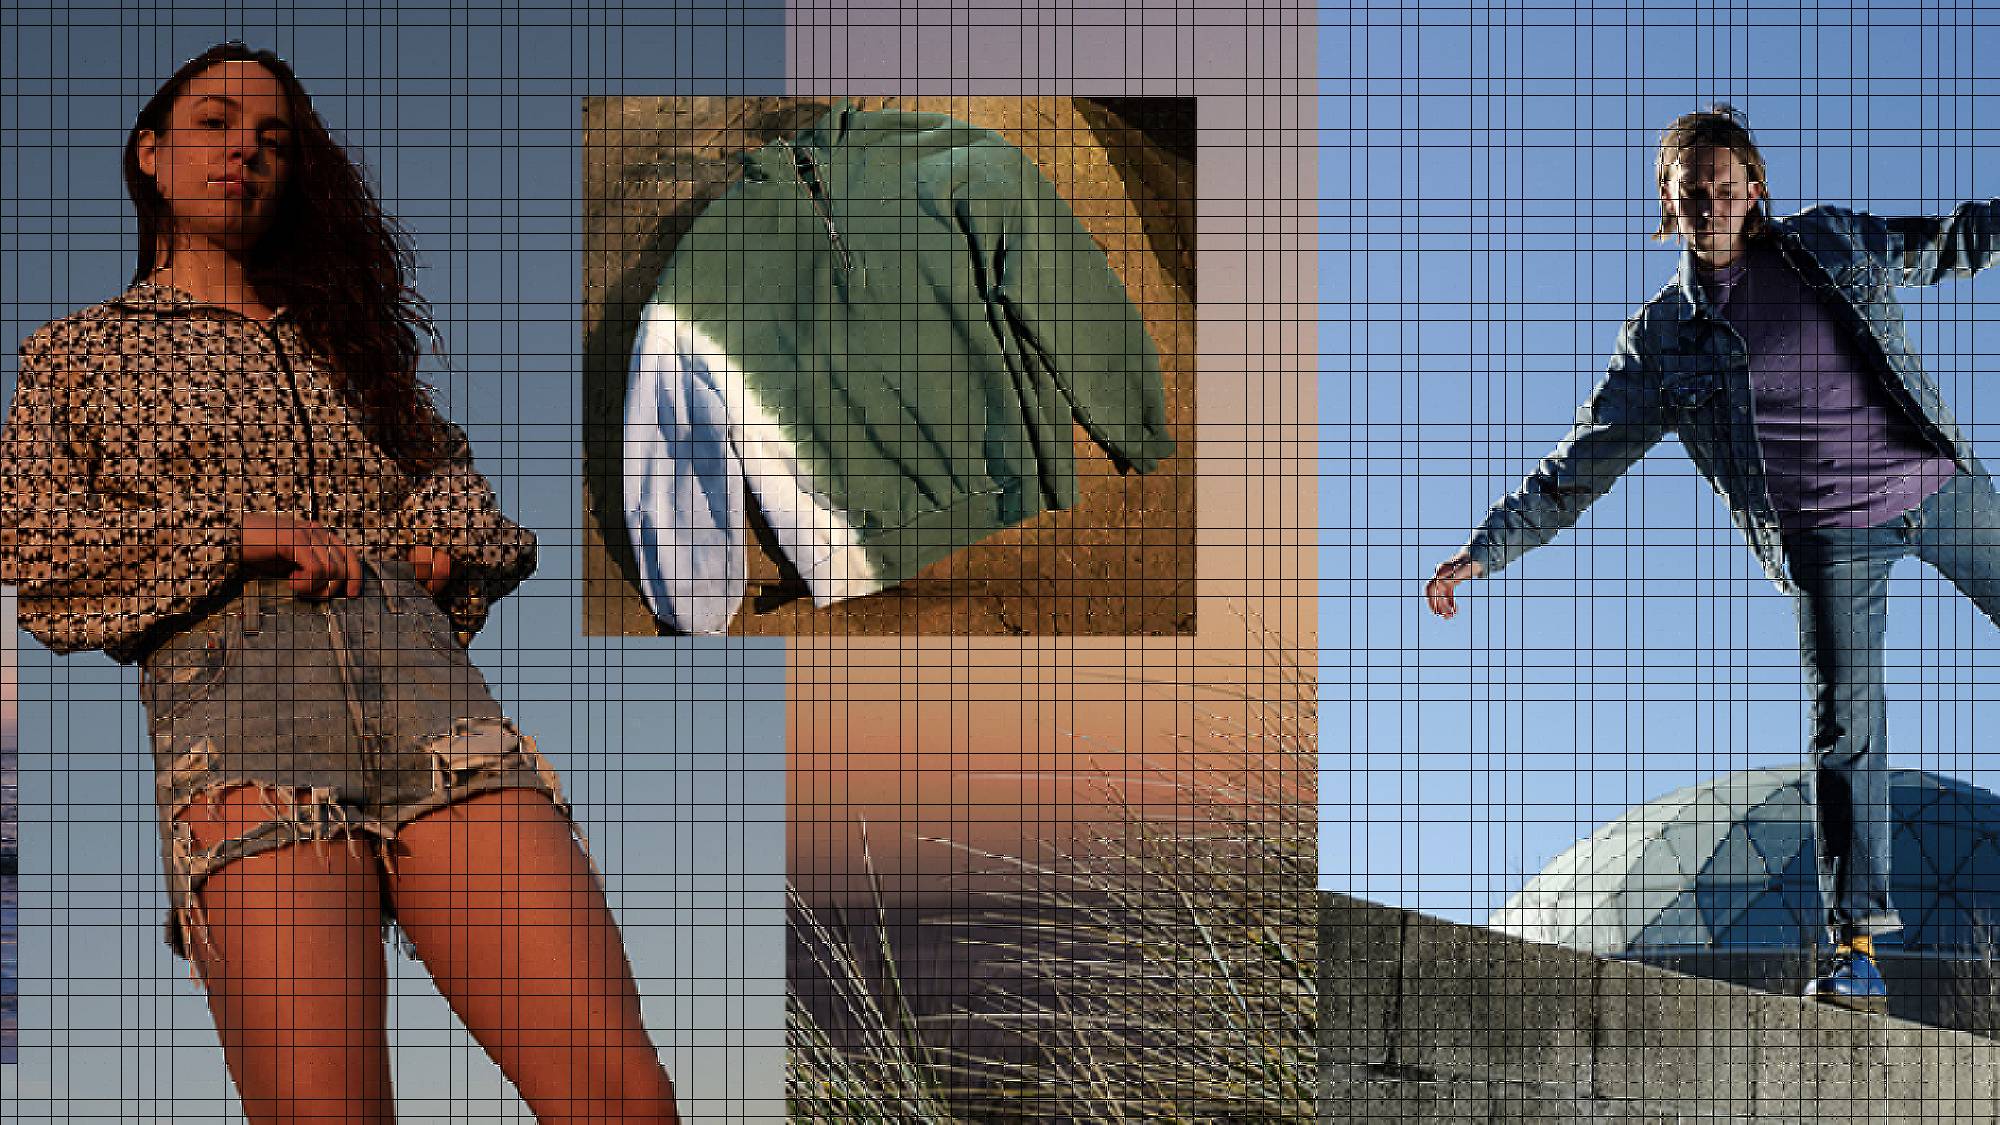 Collage of four images: the left image is of the beach at sunset, the middle left image is of a model wearing a floral jacket and denim cutoff shorts, the middle right image is of a turquoise sweatshirt laid on a rock and the furthest right image is of a person standing on one foot on a ledge, raising their arms while wearing a purple shirt, denim trucker jacket and denim blue jeans.